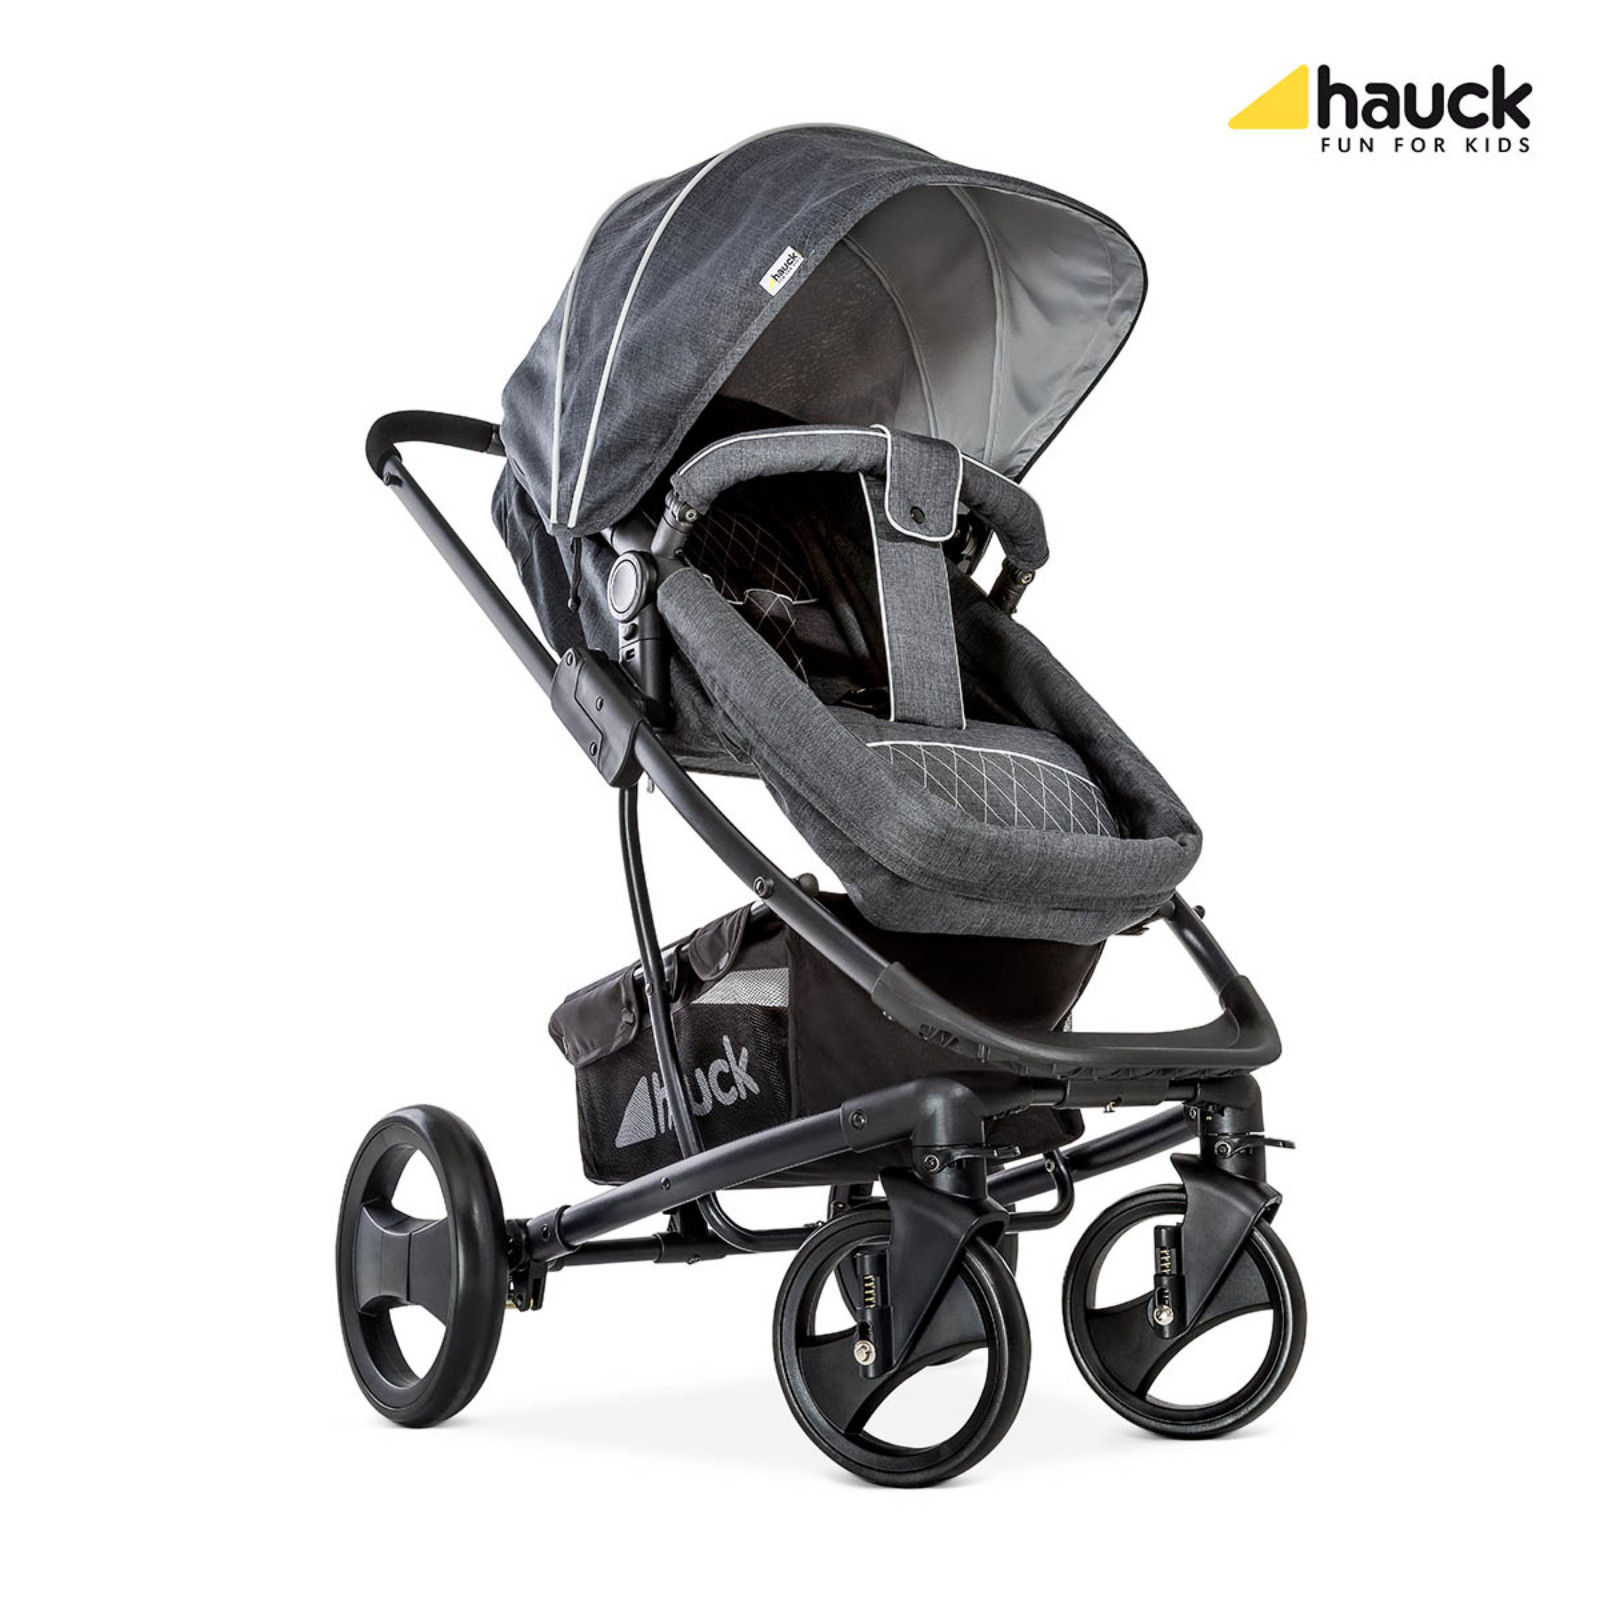 hauck pacific 4 travel system